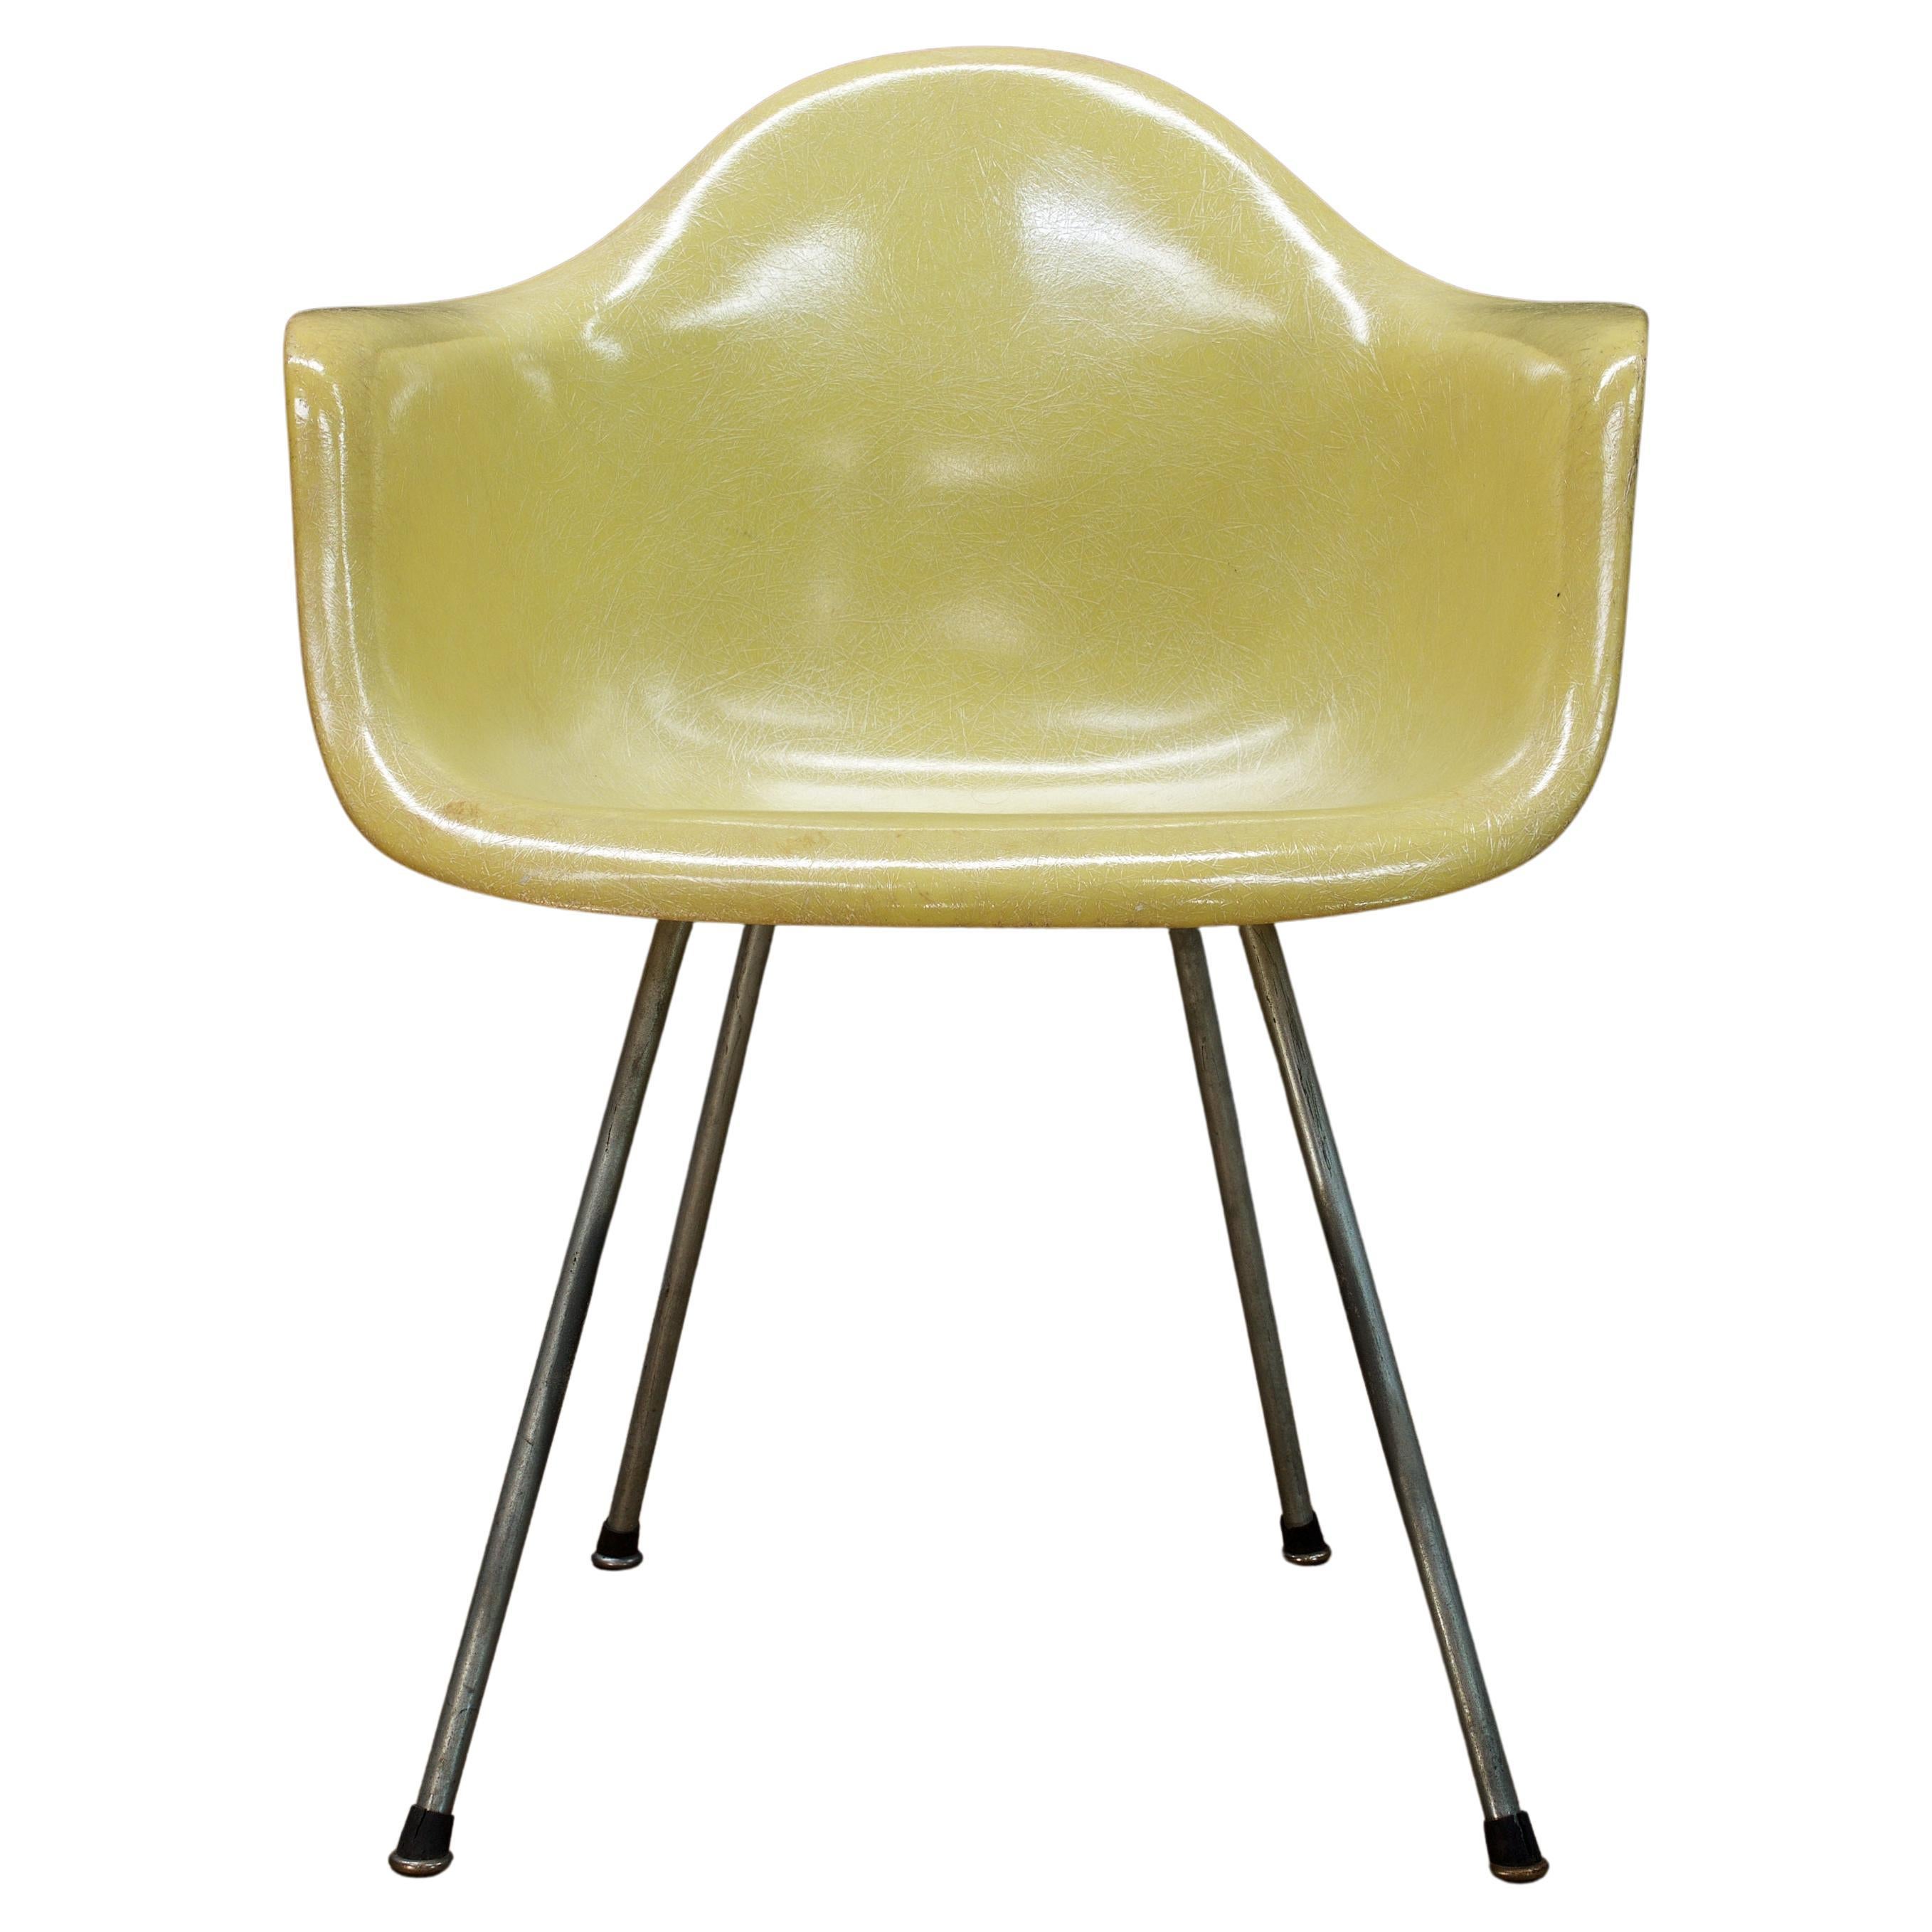 Vintage 1950s Lemon Yellow DAX Chair Charles+Ray Eames Zenith Herman Miller For Sale